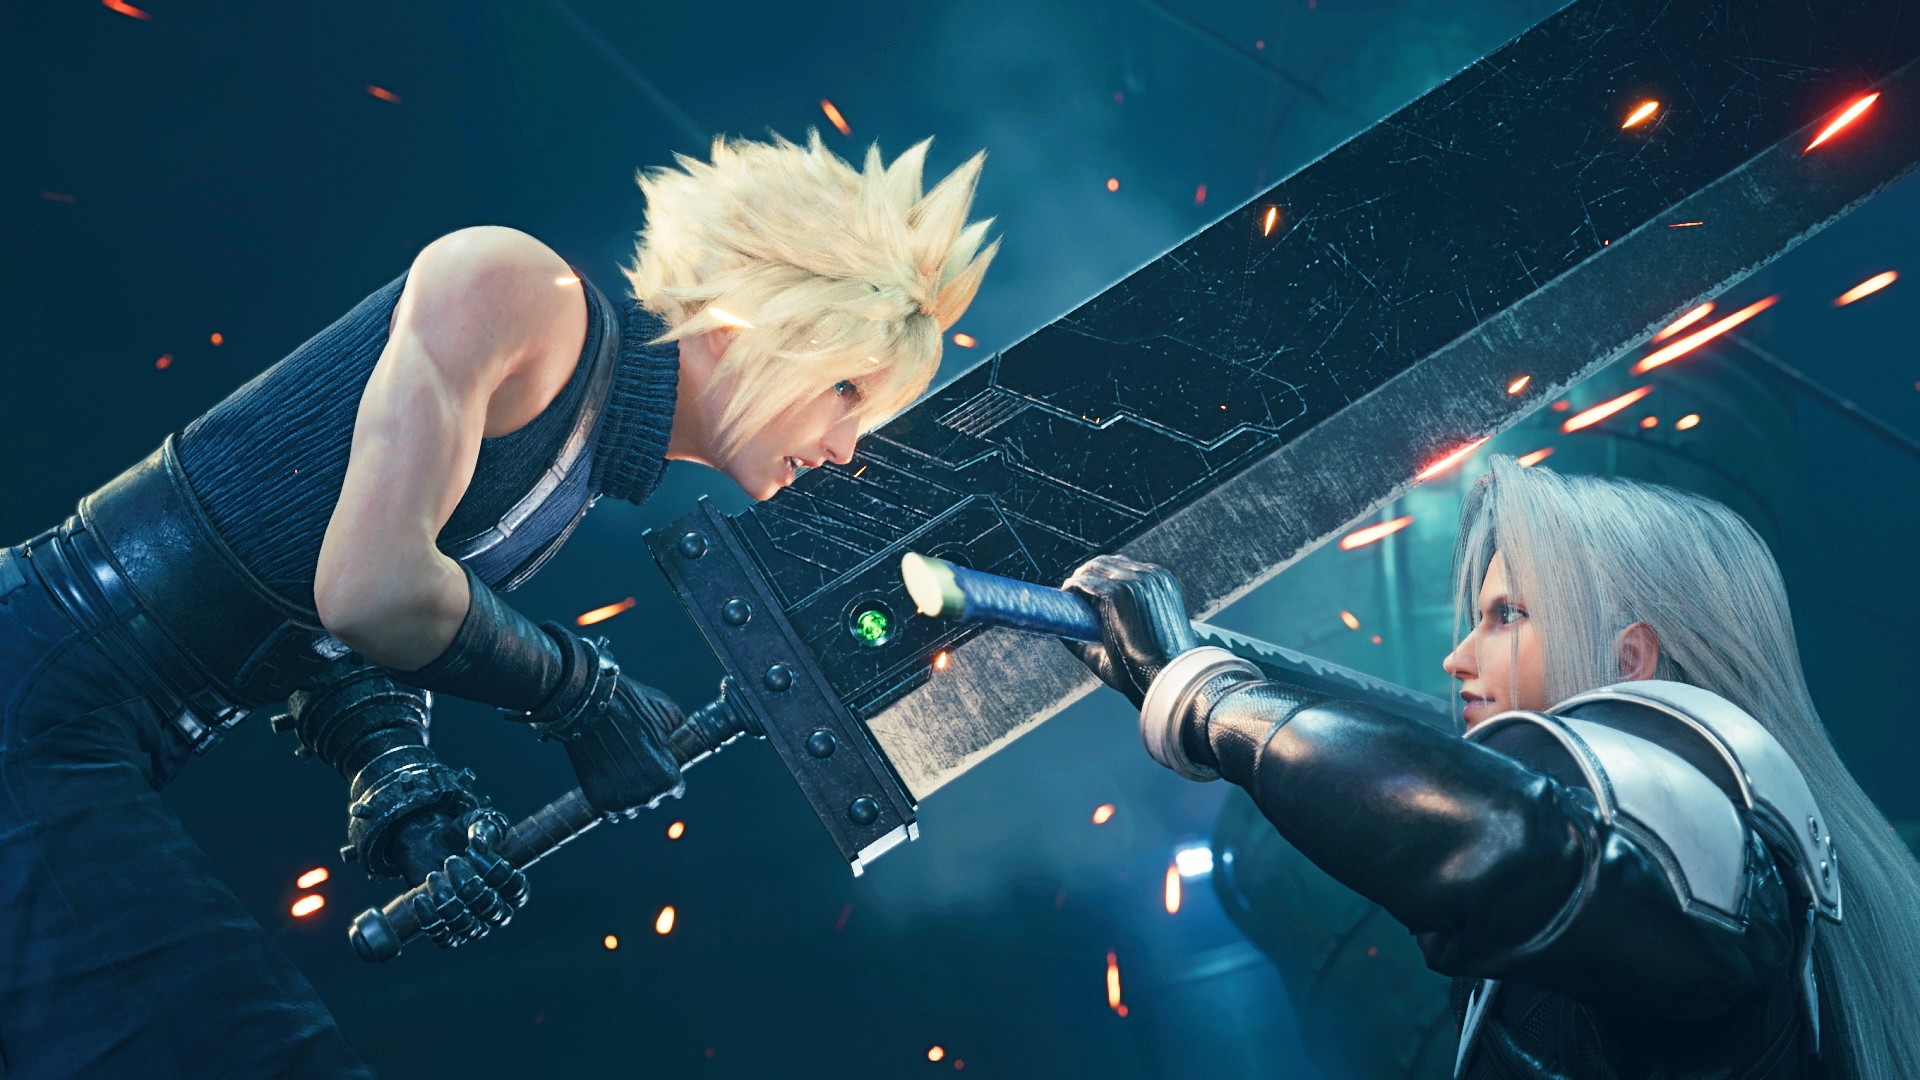 Crisis Core: Final Fantasy VII Reunion details story, characters,  enhancements, and battle system - Gematsu